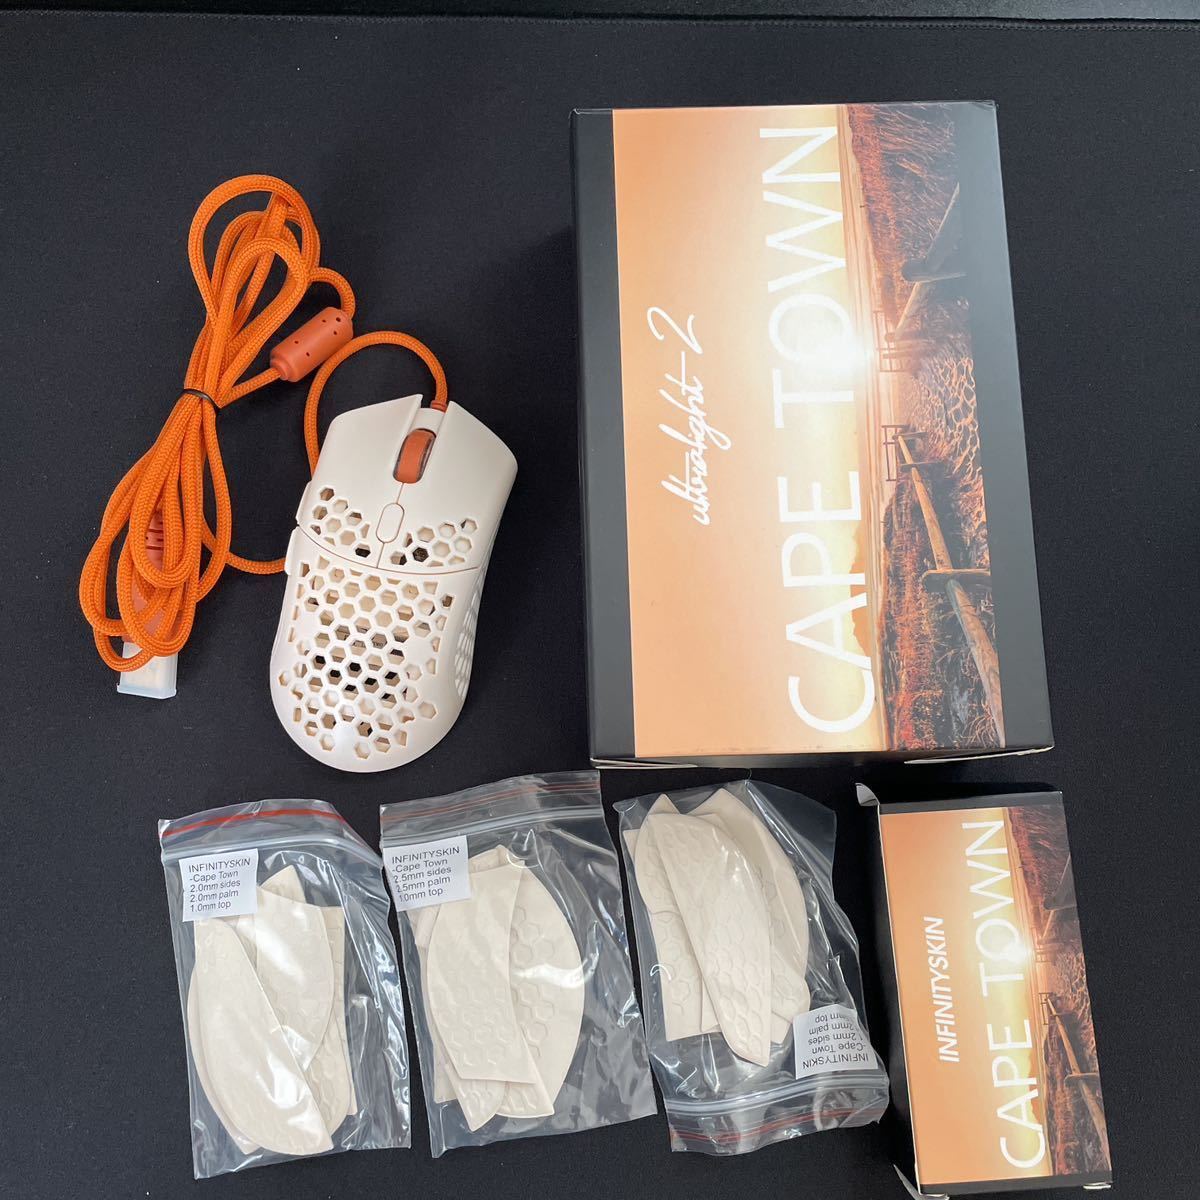 FinalMouse Ultralight2 Cape Town ゲーミングマウス USBマウス(USBマウス)｜売買されたオークション情報、ヤフオク!  の商品情報をアーカイブ公開